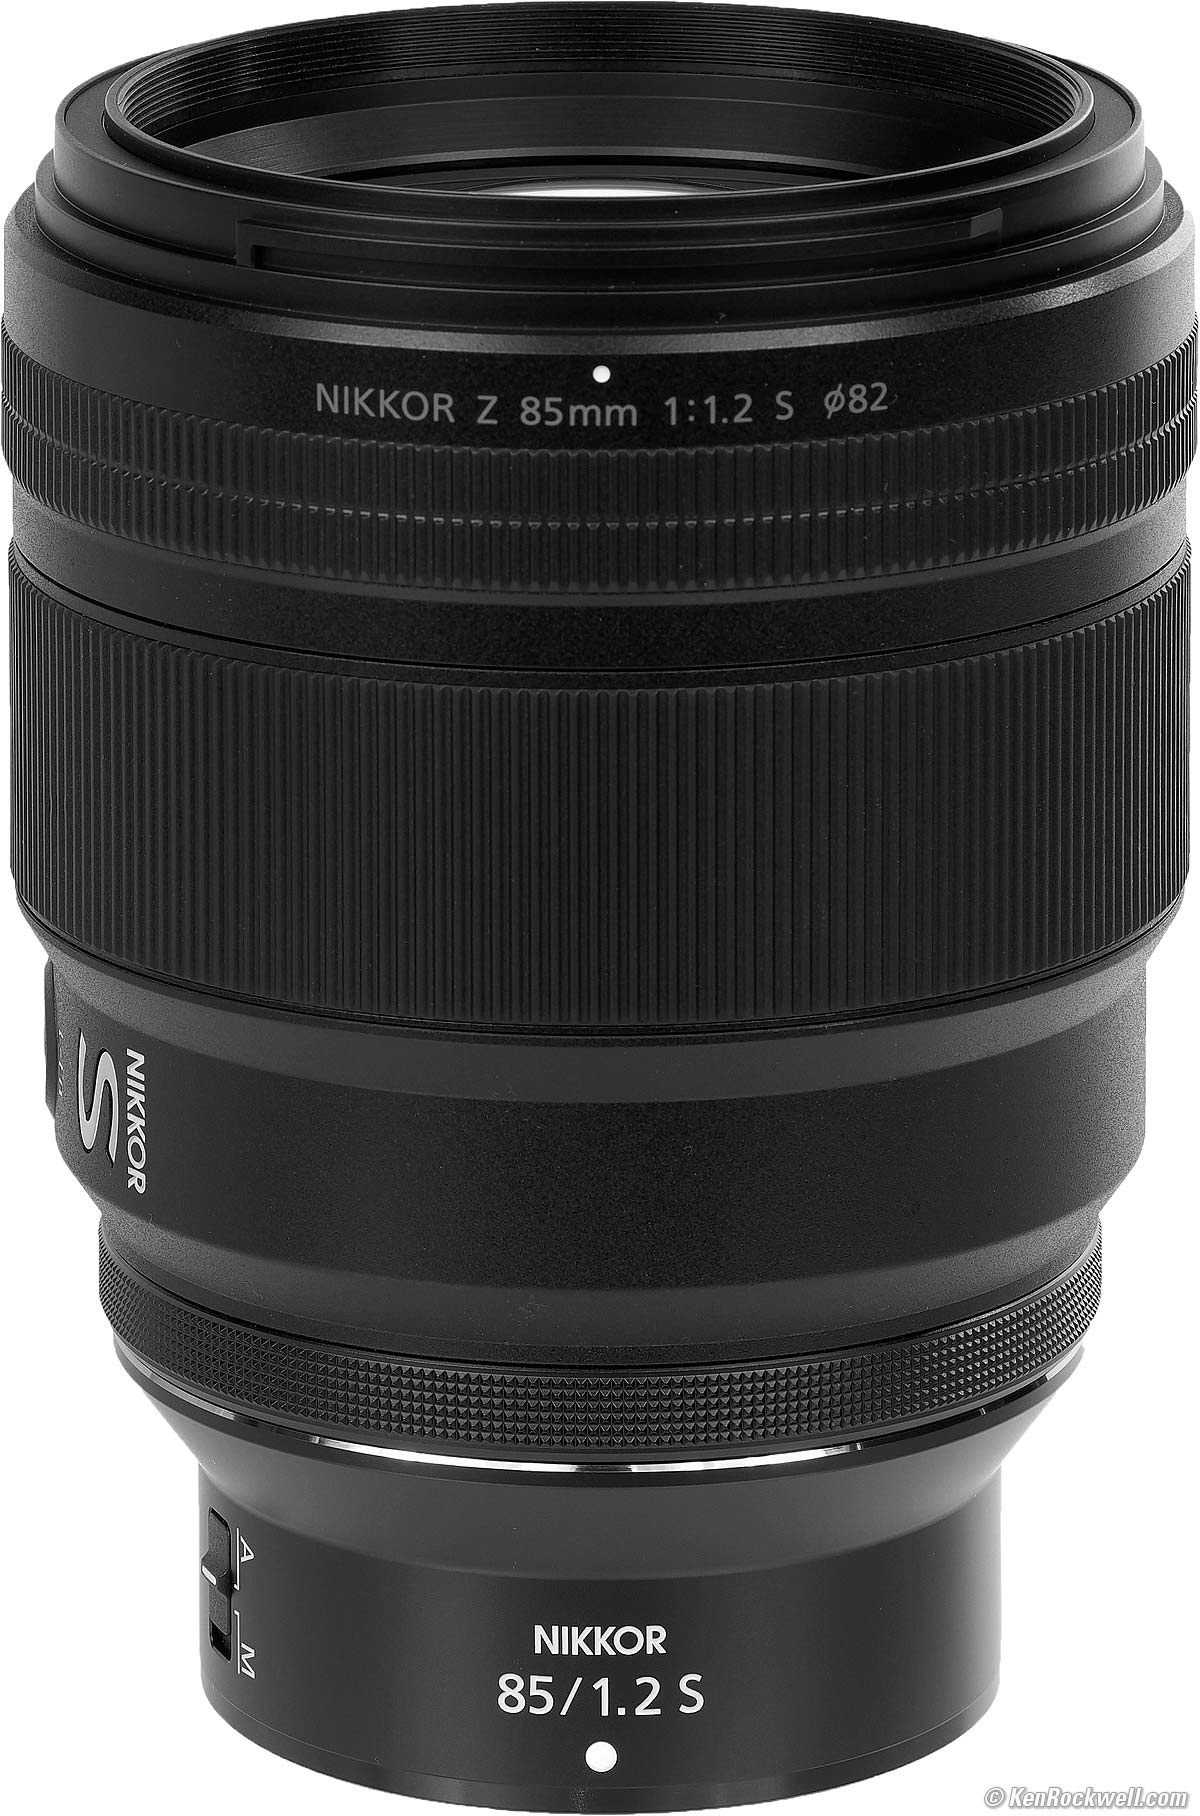 Nikon Z 85mm f/1.2 Review & Sample Images by Ken Rockwell